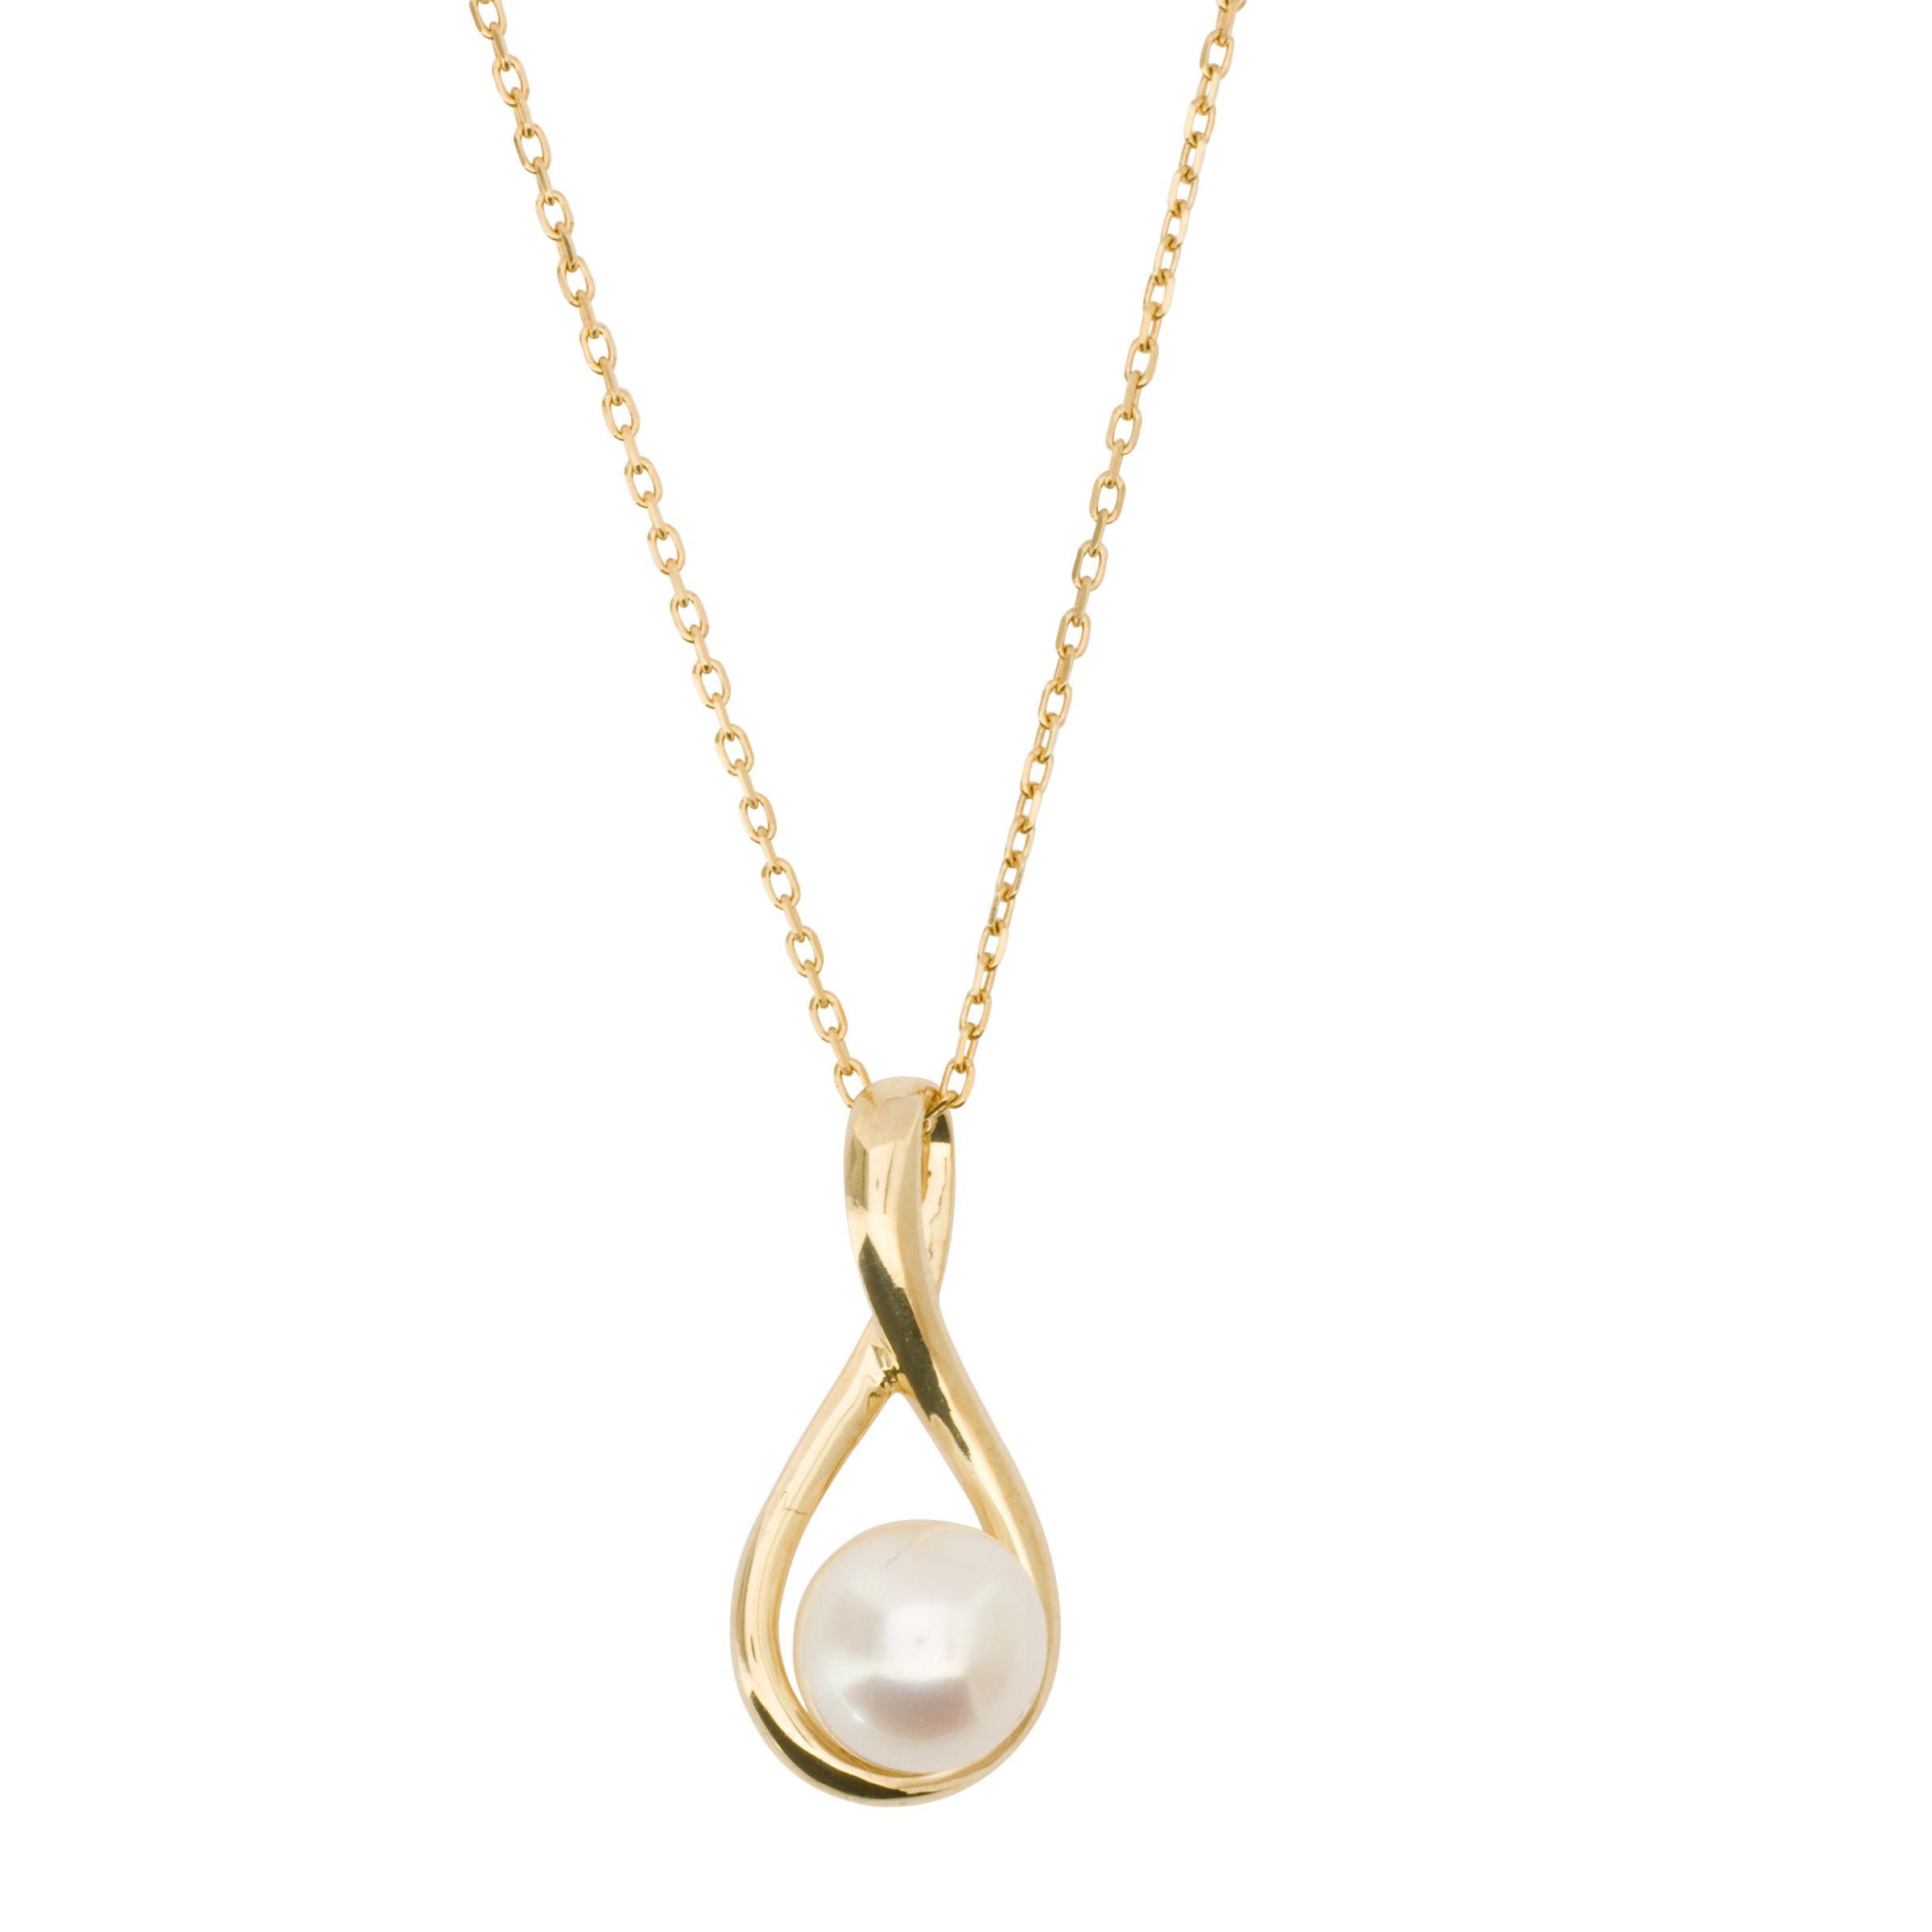 Buy London Road 9ct Yellow Gold Pearl Pendant, White Online at ...